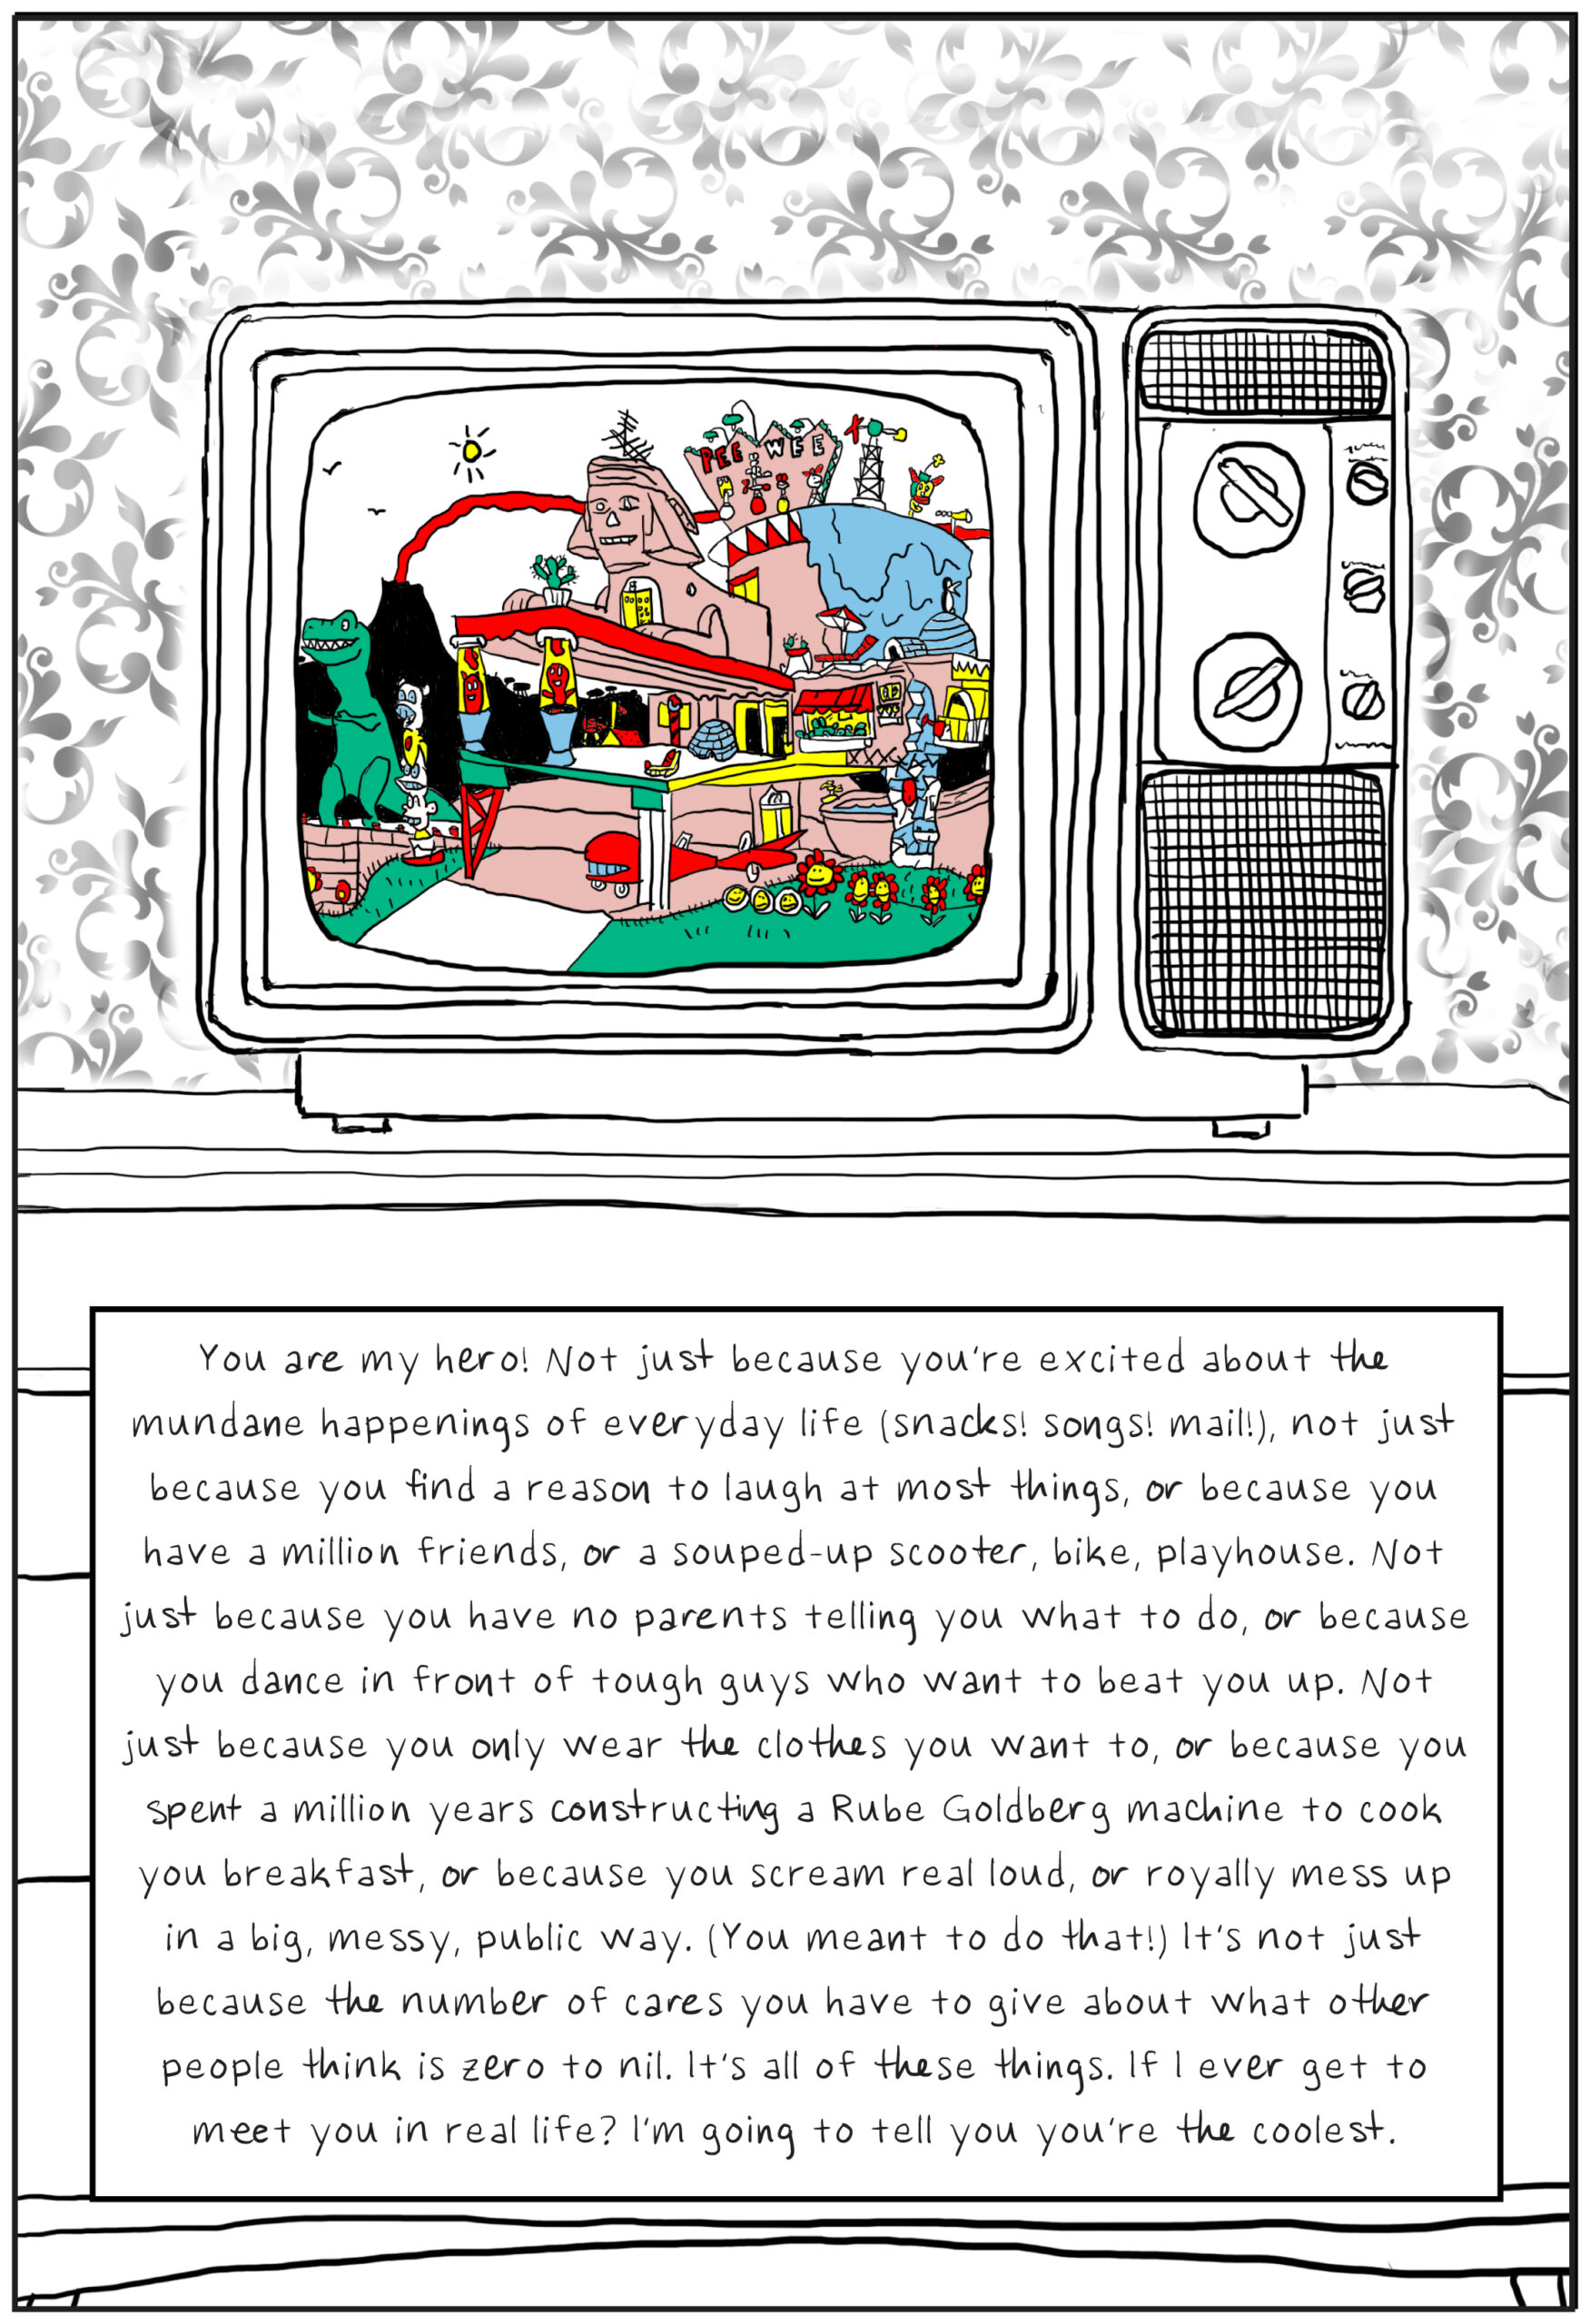 A shot from Pee-wee's Playhouse is displayed on a 1980s television set sitting on top of a wooden console in front of a wall covered in faded, patterned wallpaper. The screen is the only thing in color. Text: You are my hero! Not just because you’re excited about the mundane happenings of everyday life (snacks! songs! mail!), not just because you find a reason to laugh at most things, or because you have a million friends, or a souped-up scooter, bike, playhouse. Not just because you have no parents telling you what to do, or because you dance in front of tough guys who want to beat you up. Not just because you only wear the clothes you want to, or because you spent a million years constructing a Rube Goldberg machine to cook you breakfast, or because you scream real loud, or royally mess up in a big, messy, public way. (You meant to do that!) It’s not just because the number of cares you have to give about what other people think is zero to nil. It’s all of these things. If I ever get to meet you in real life? I’m going to tell you you’re the coolest.